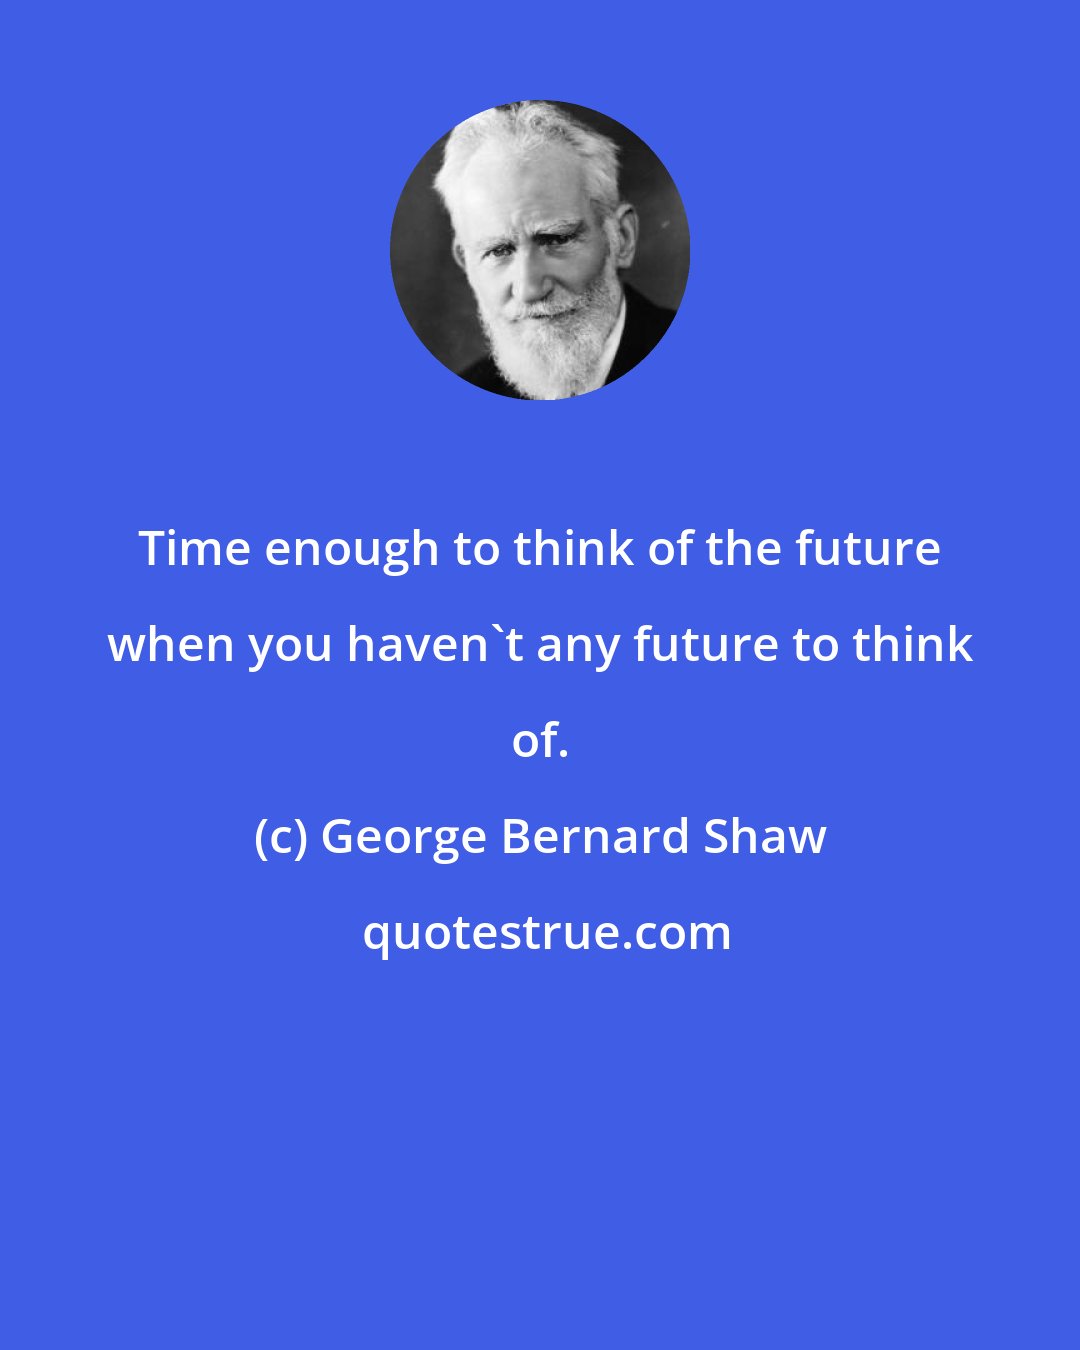 George Bernard Shaw: Time enough to think of the future when you haven't any future to think of.